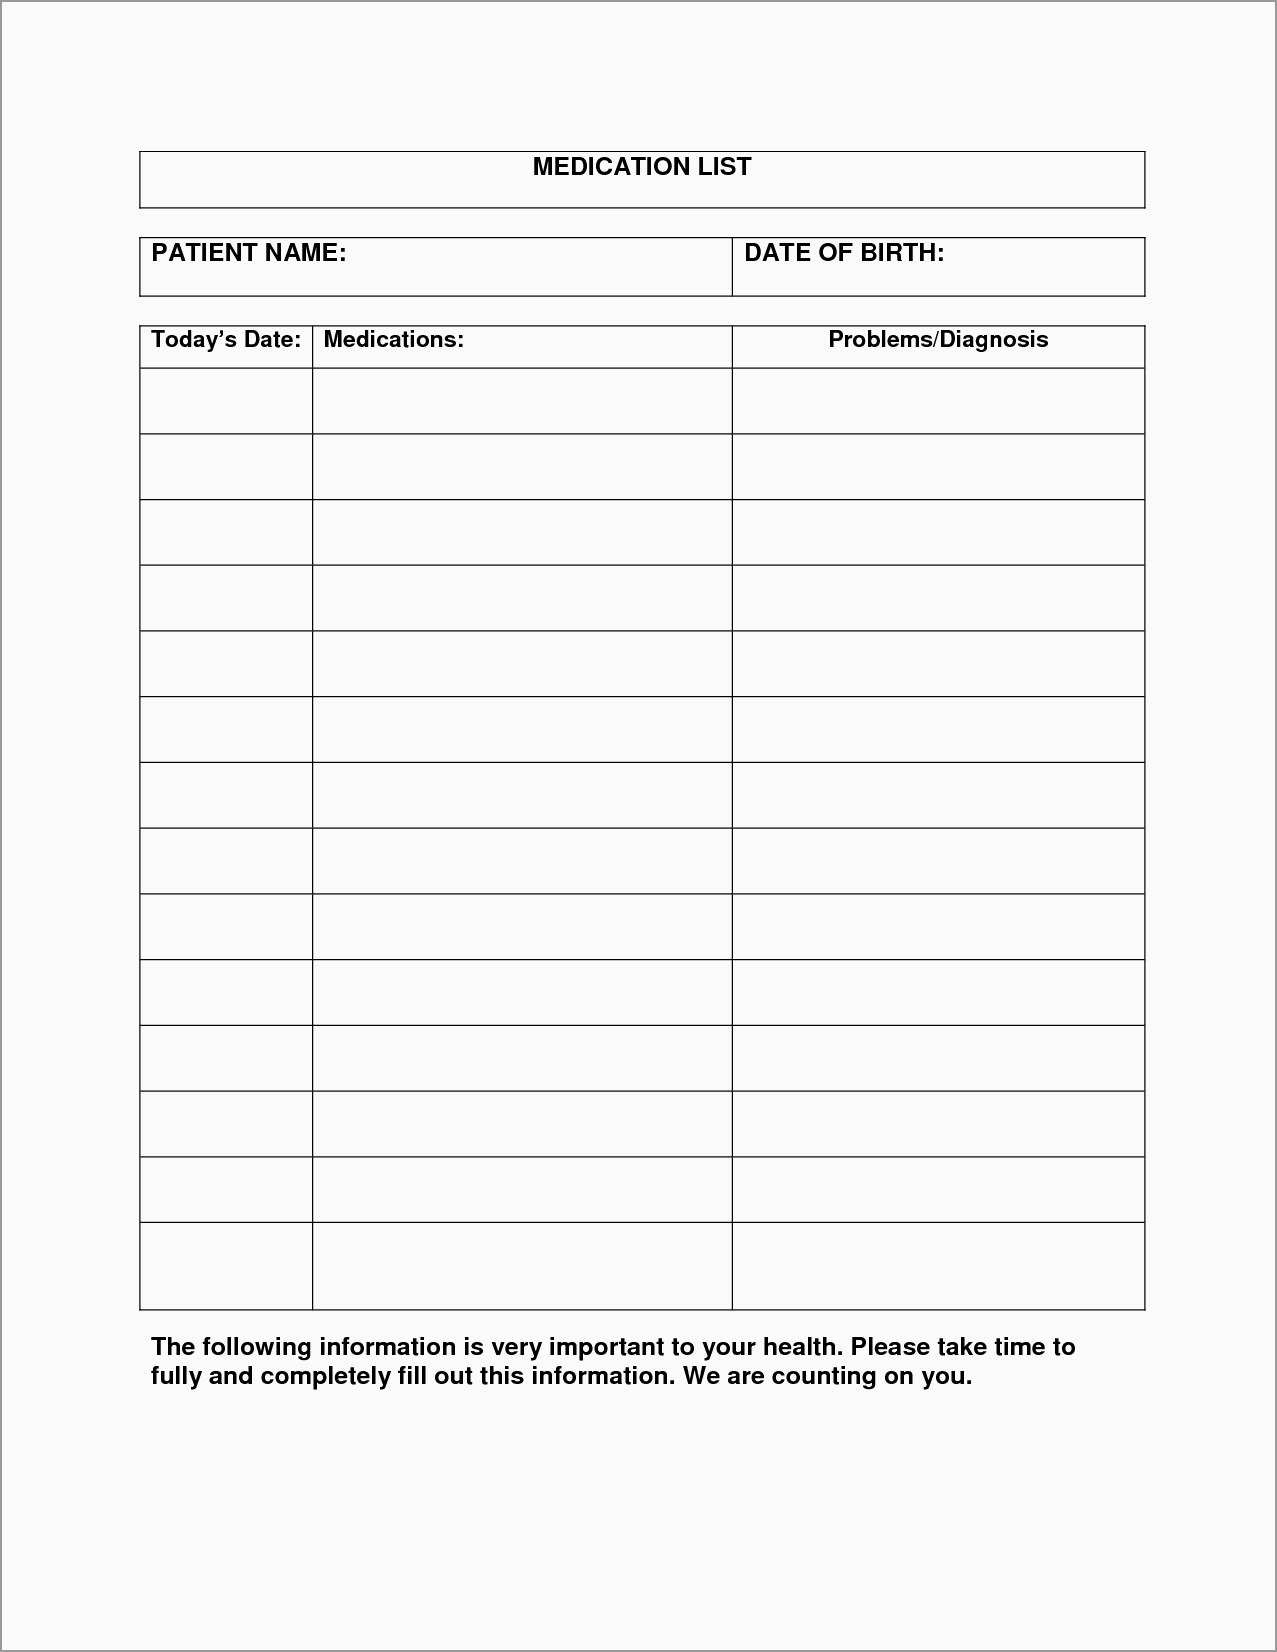 Medication List Template Free Download Fabulous Blank Medication - Free Printable Medication List